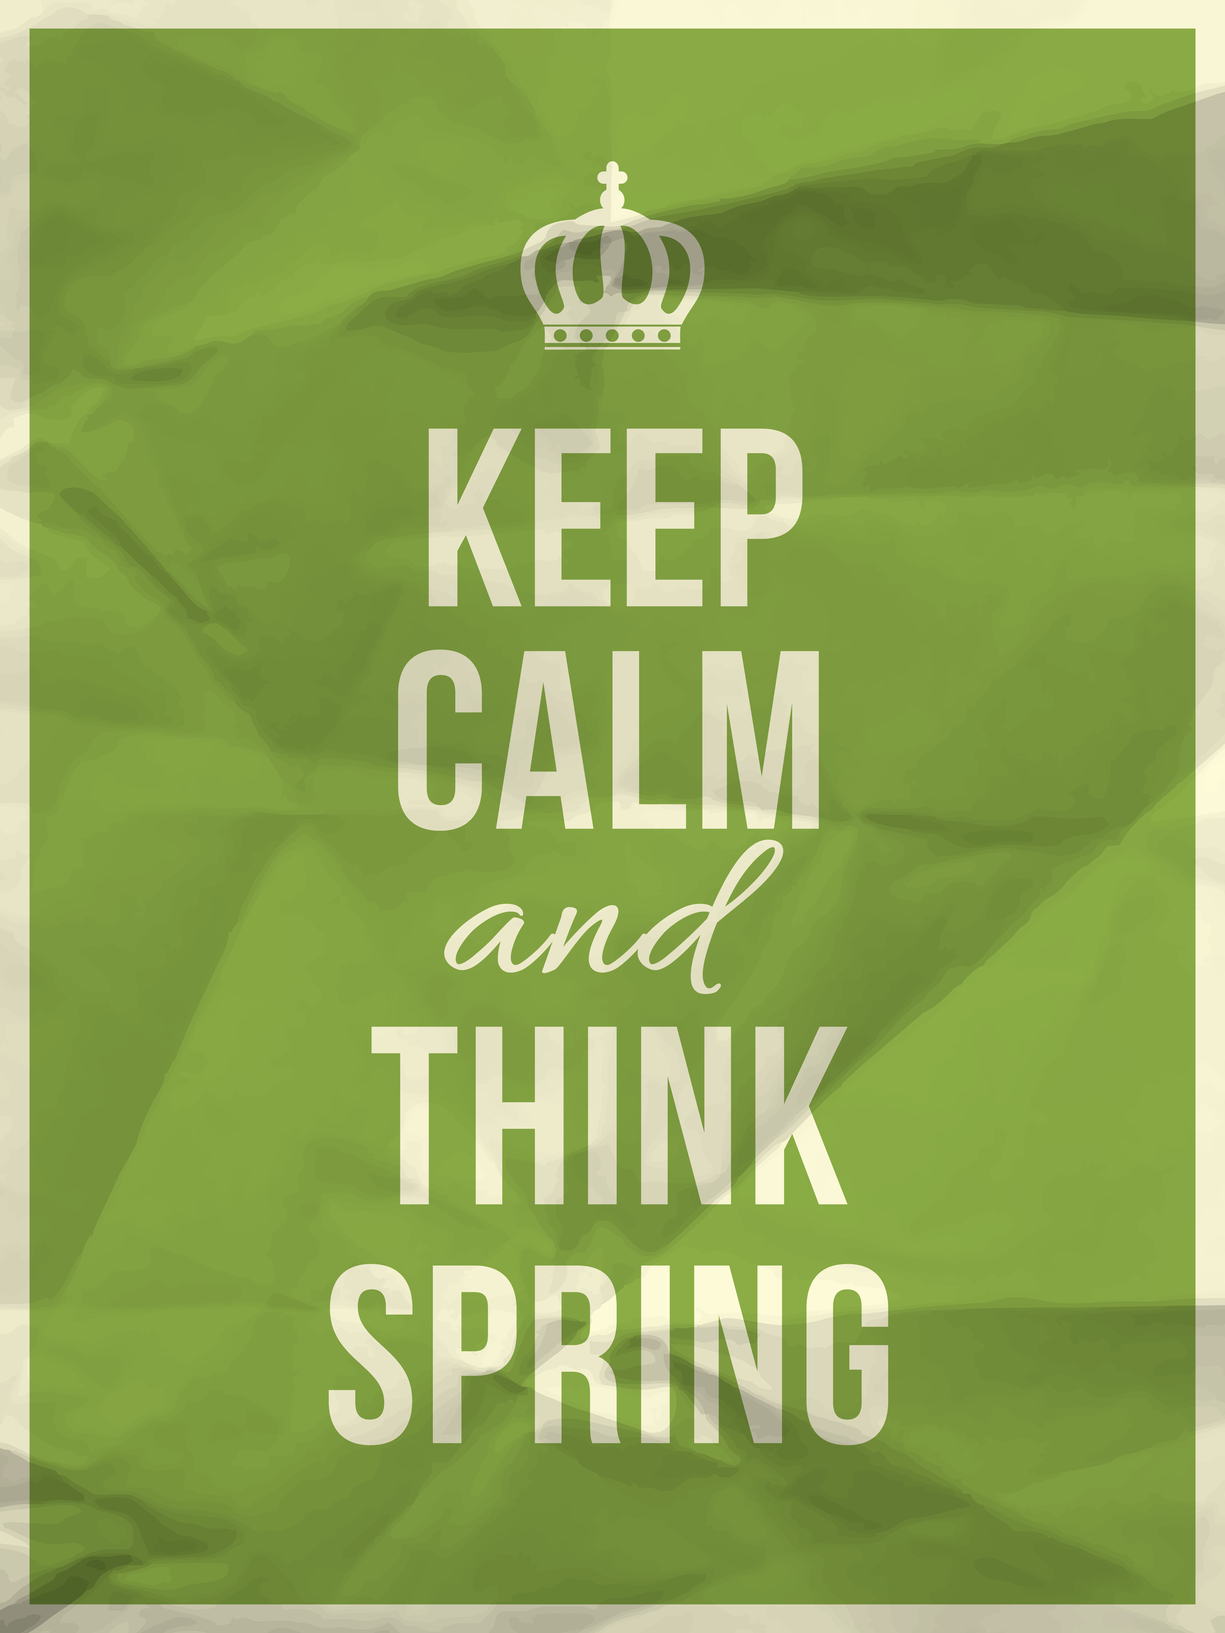 Keep calm and think spring